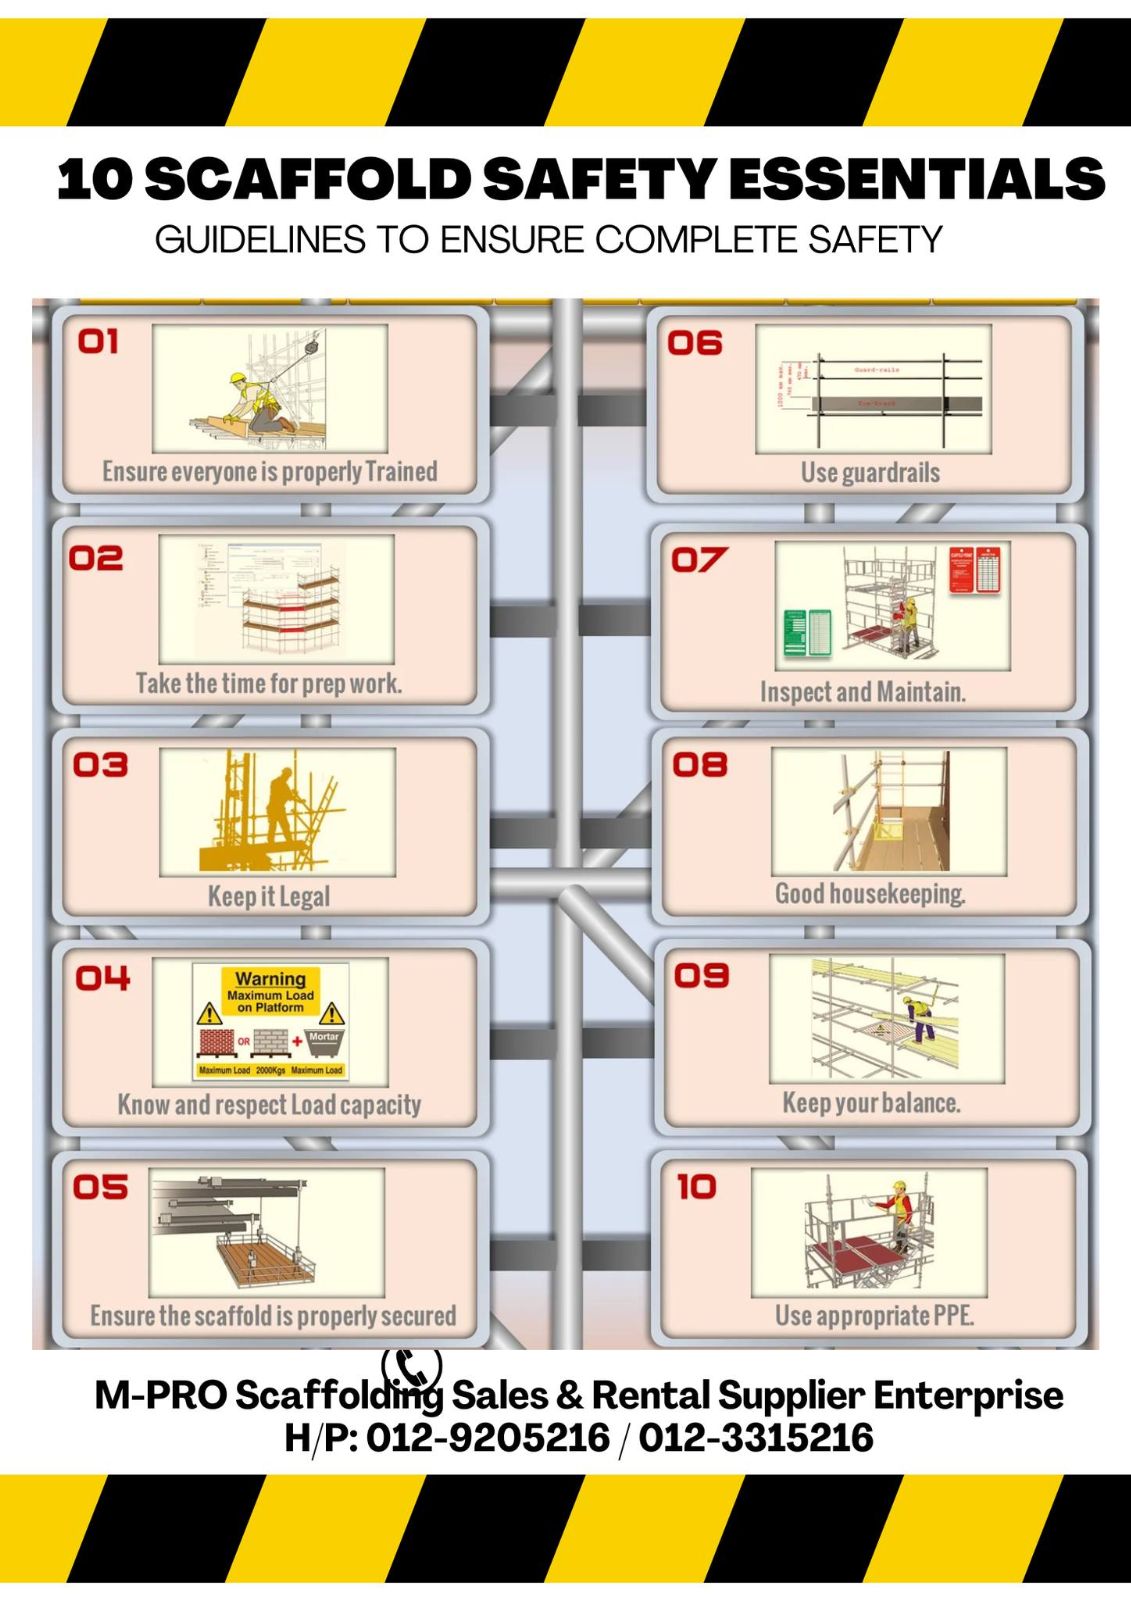 Essential Tips for Scaffold Safety